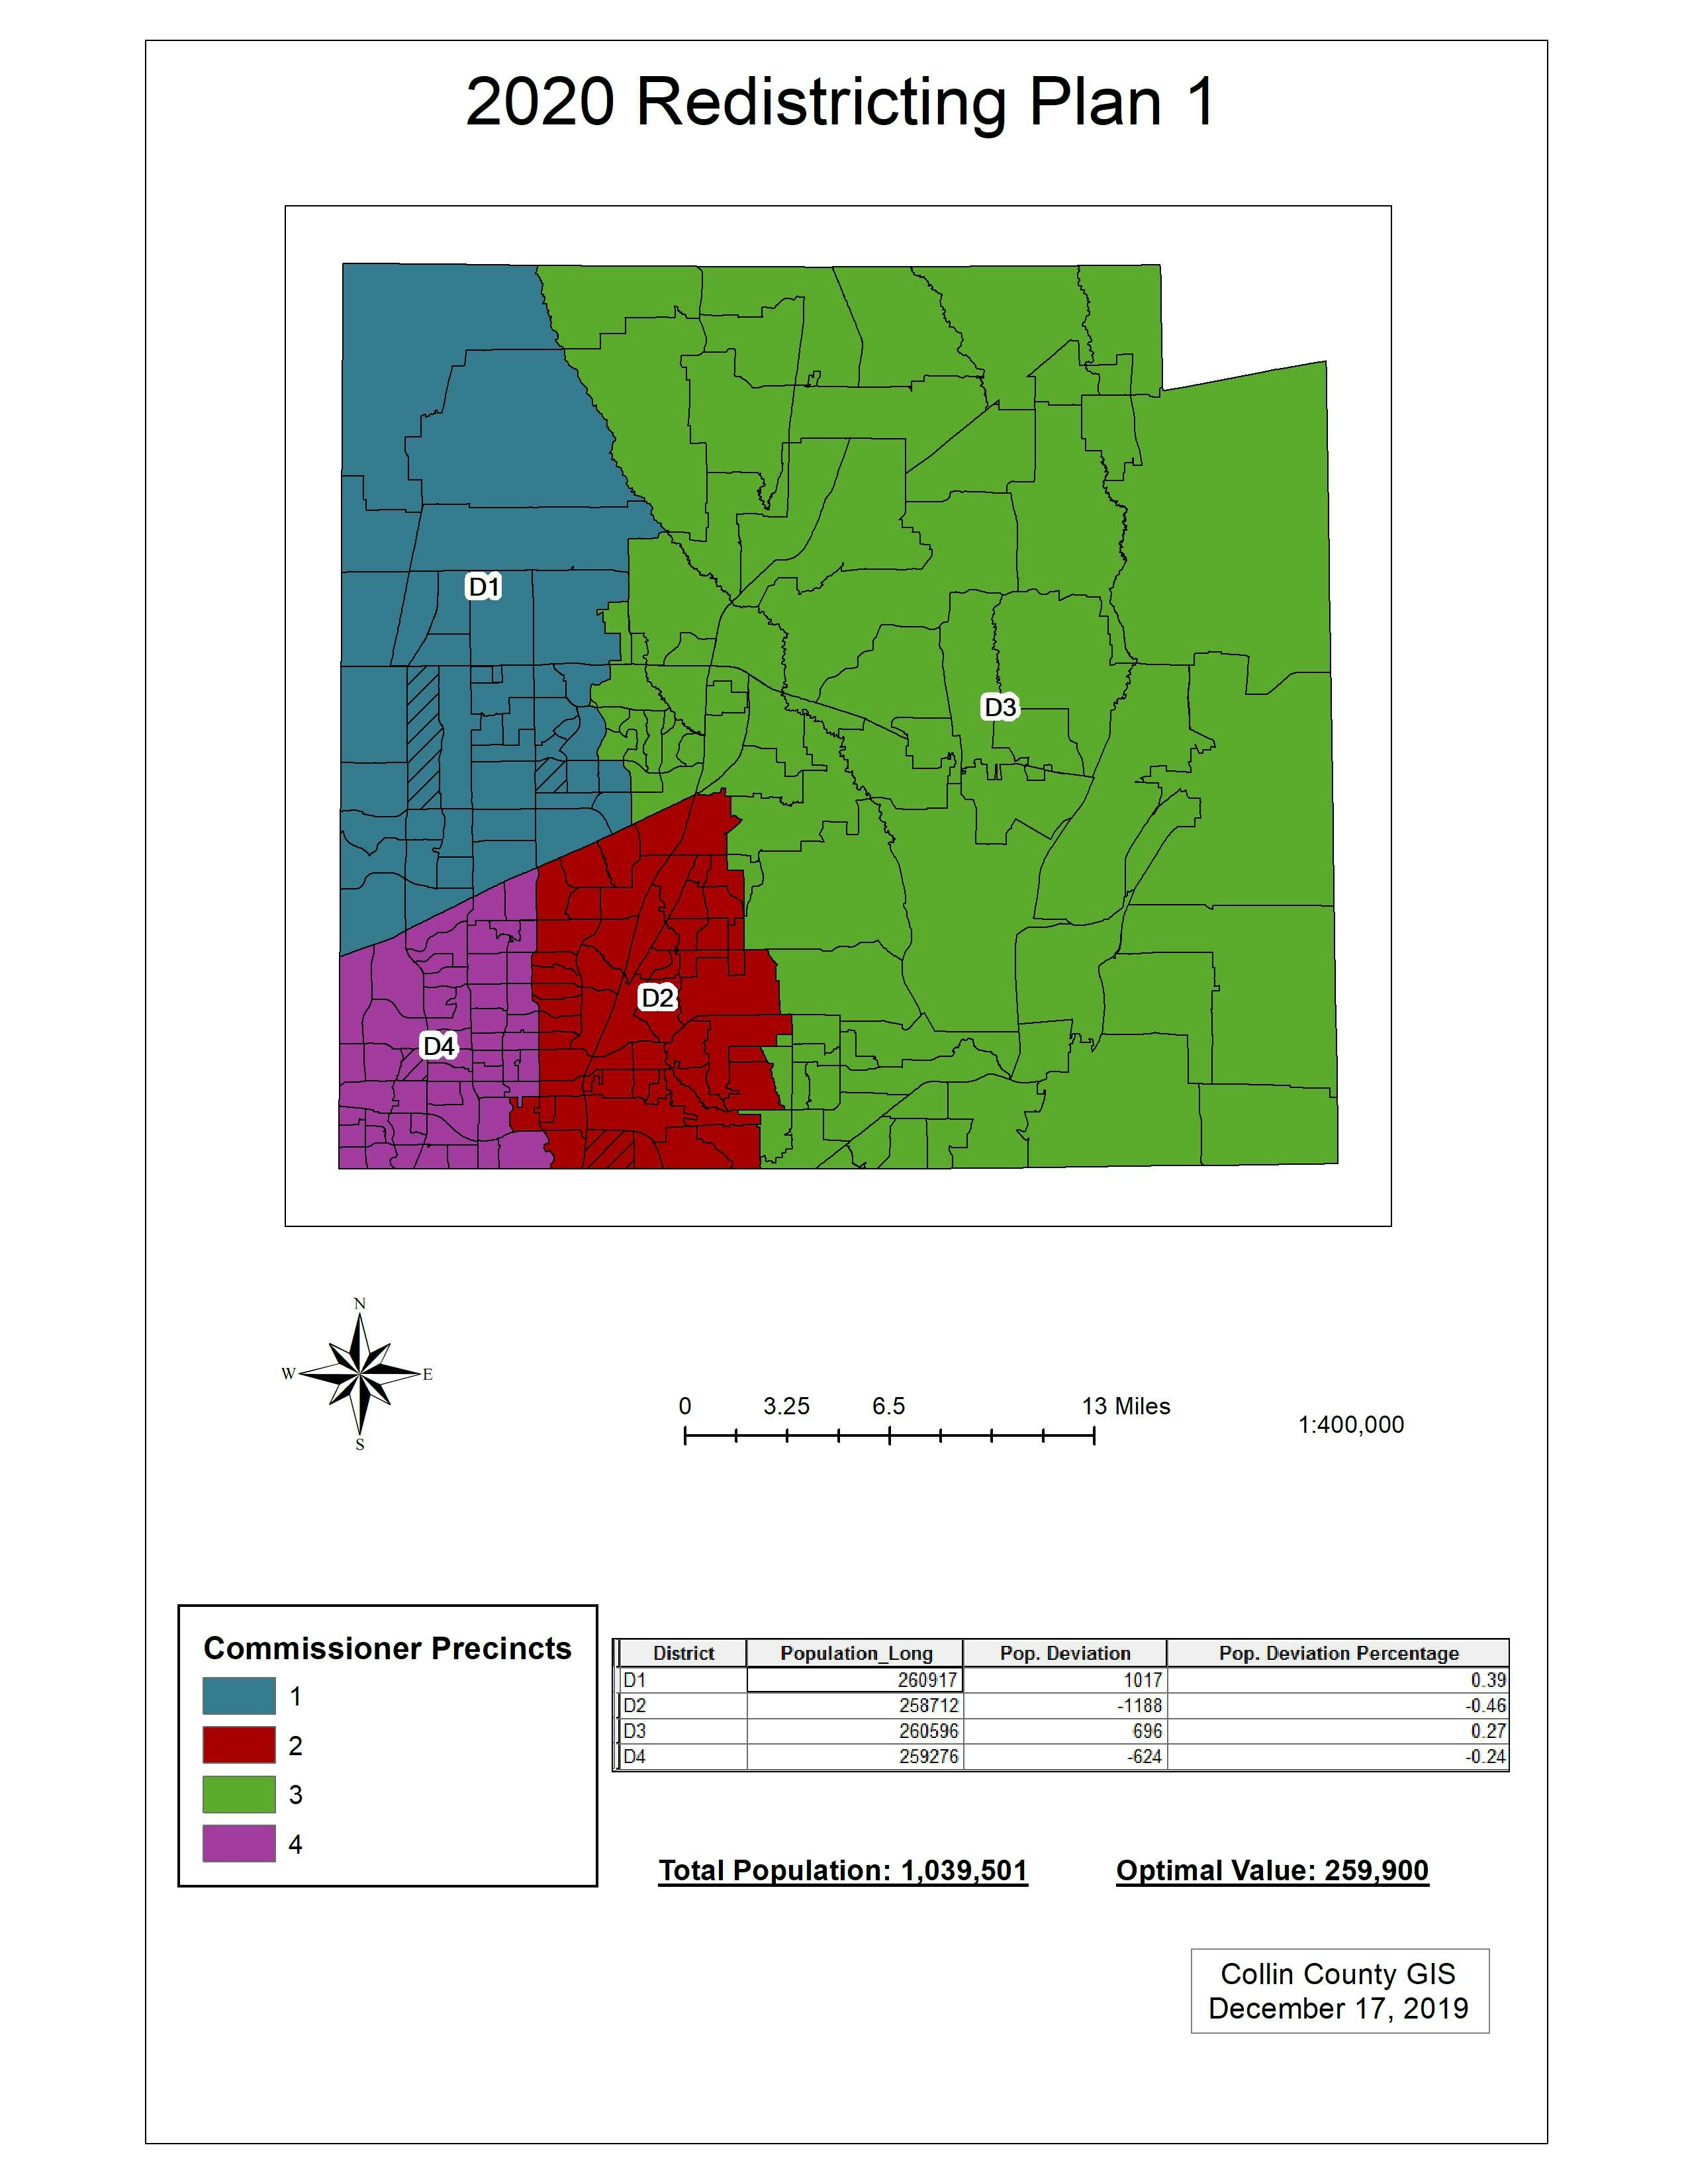 Redistricting Plan 1-Collin County